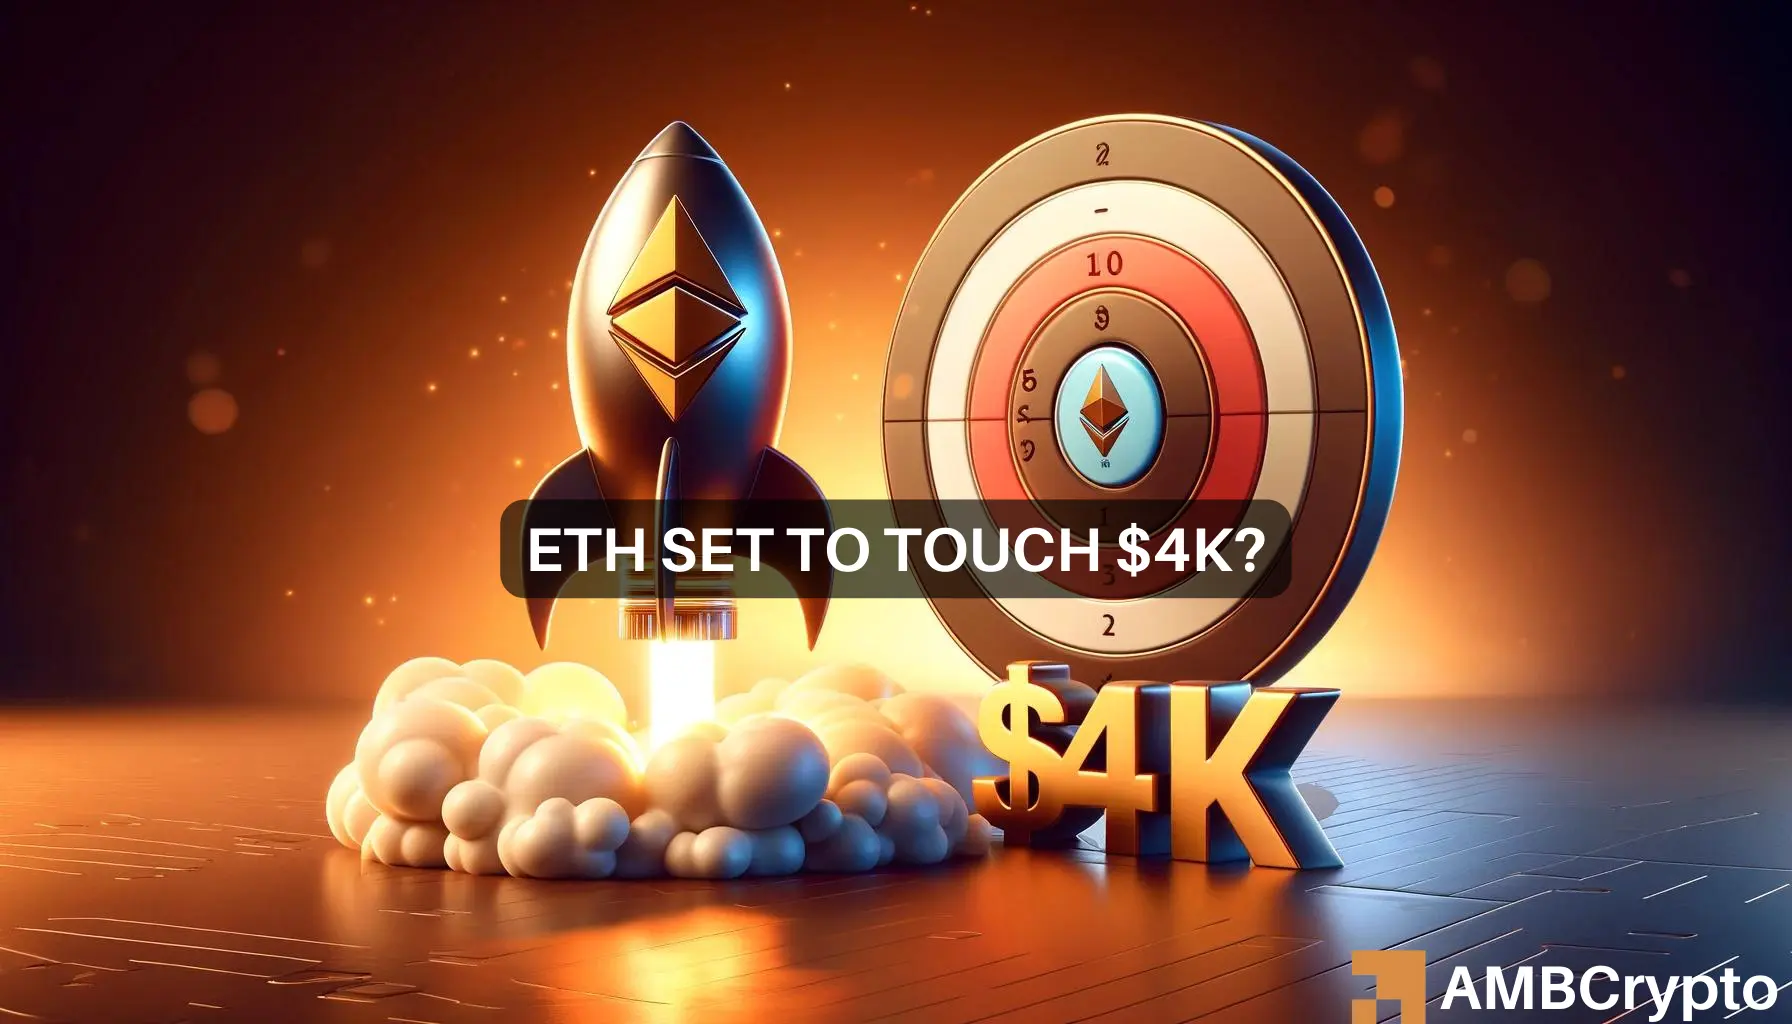 Ethereum sets sights on $4K: Will THIS spark a new rally for ETH?